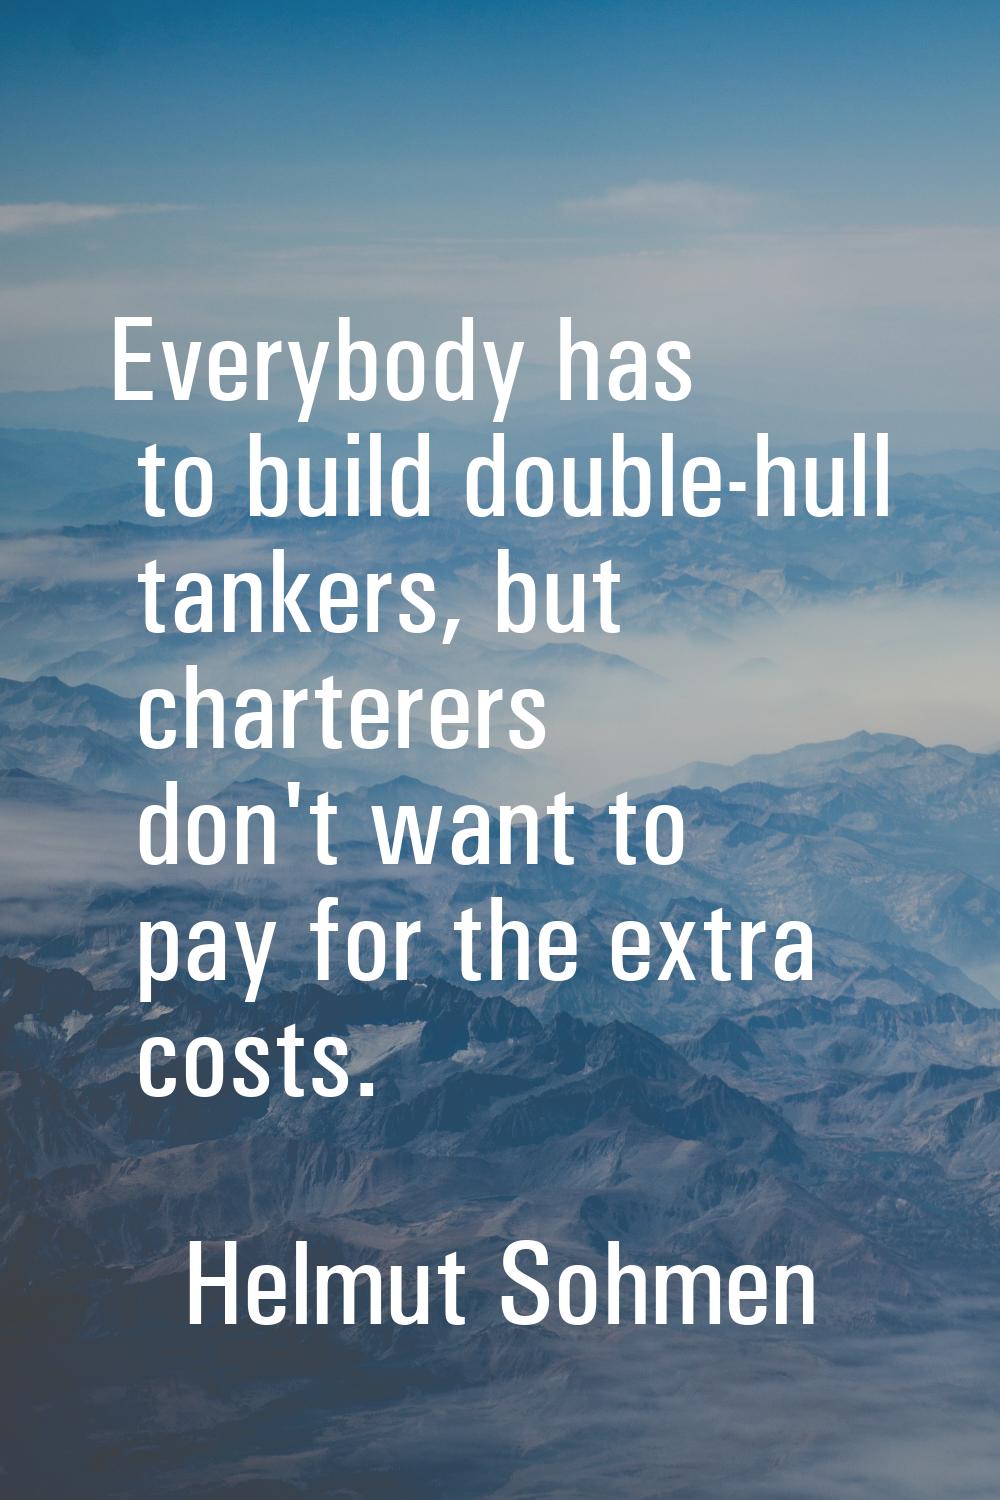 Everybody has to build double-hull tankers, but charterers don't want to pay for the extra costs.